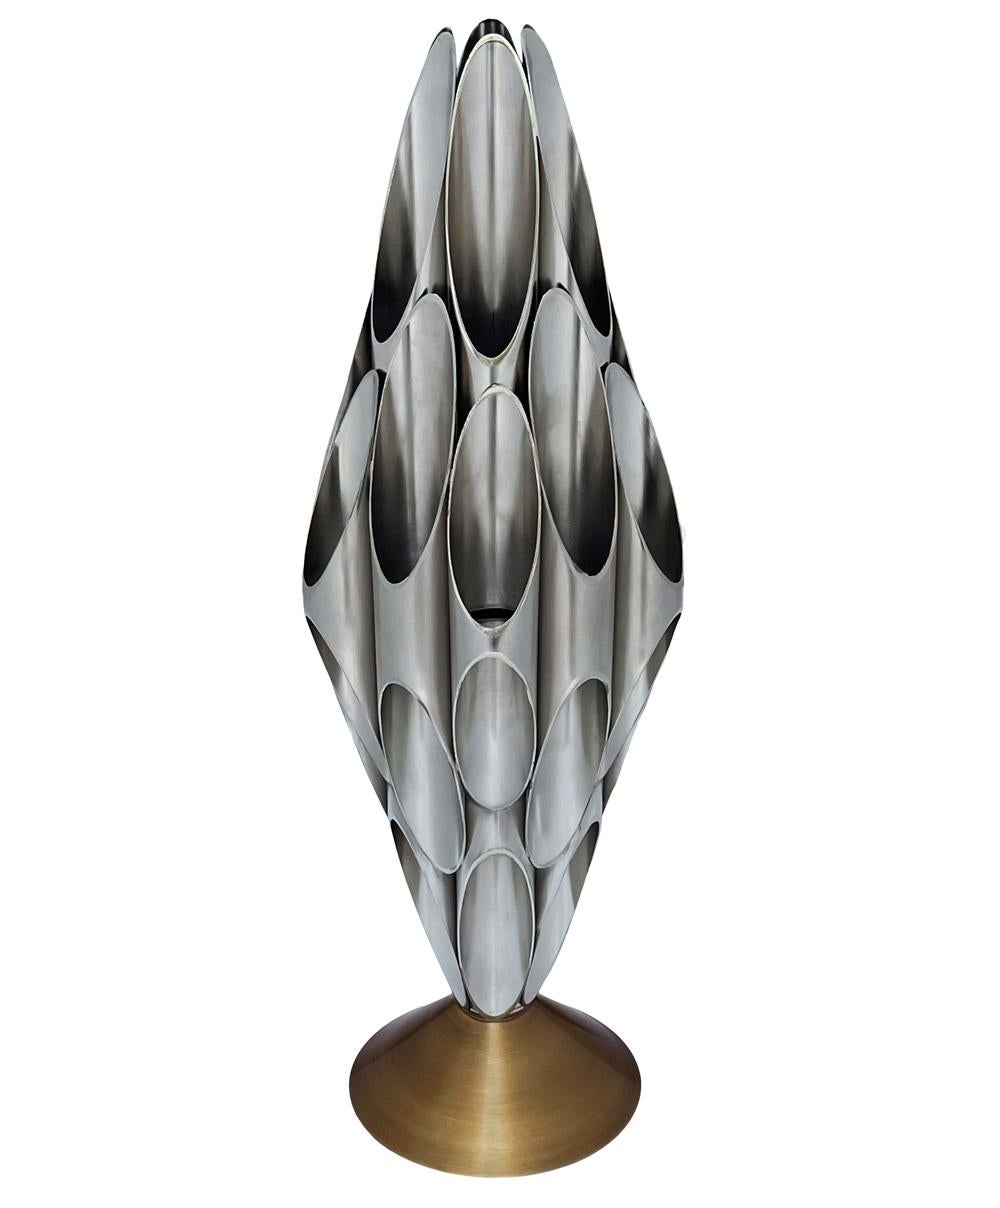 Nickel Mid-Century Modern Tubular Table Sculpture Lamp in Brass & White After Rougier For Sale